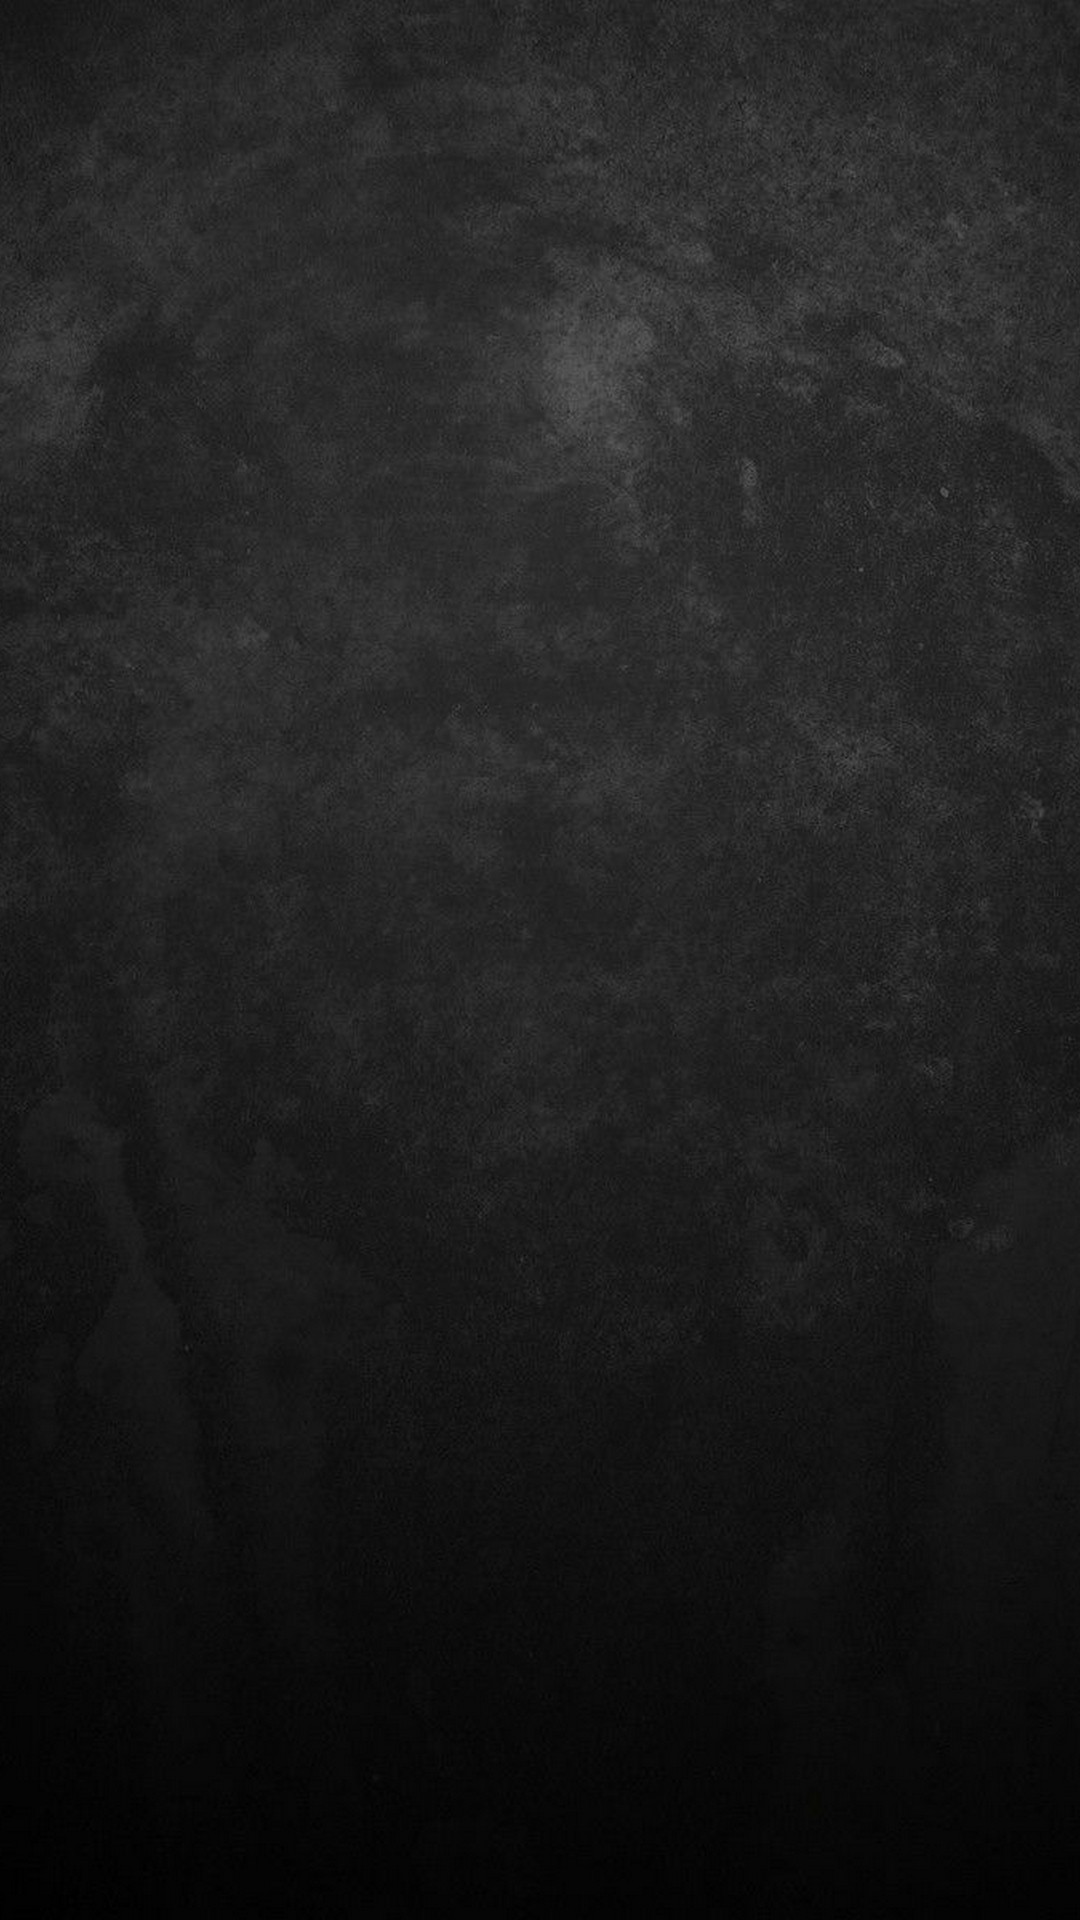 Wallpaper Dark Android With high-resolution 1080X1920 pixel. You can use this wallpaper for your Android backgrounds, Tablet, Samsung Screensavers, Mobile Phone Lock Screen and another Smartphones device